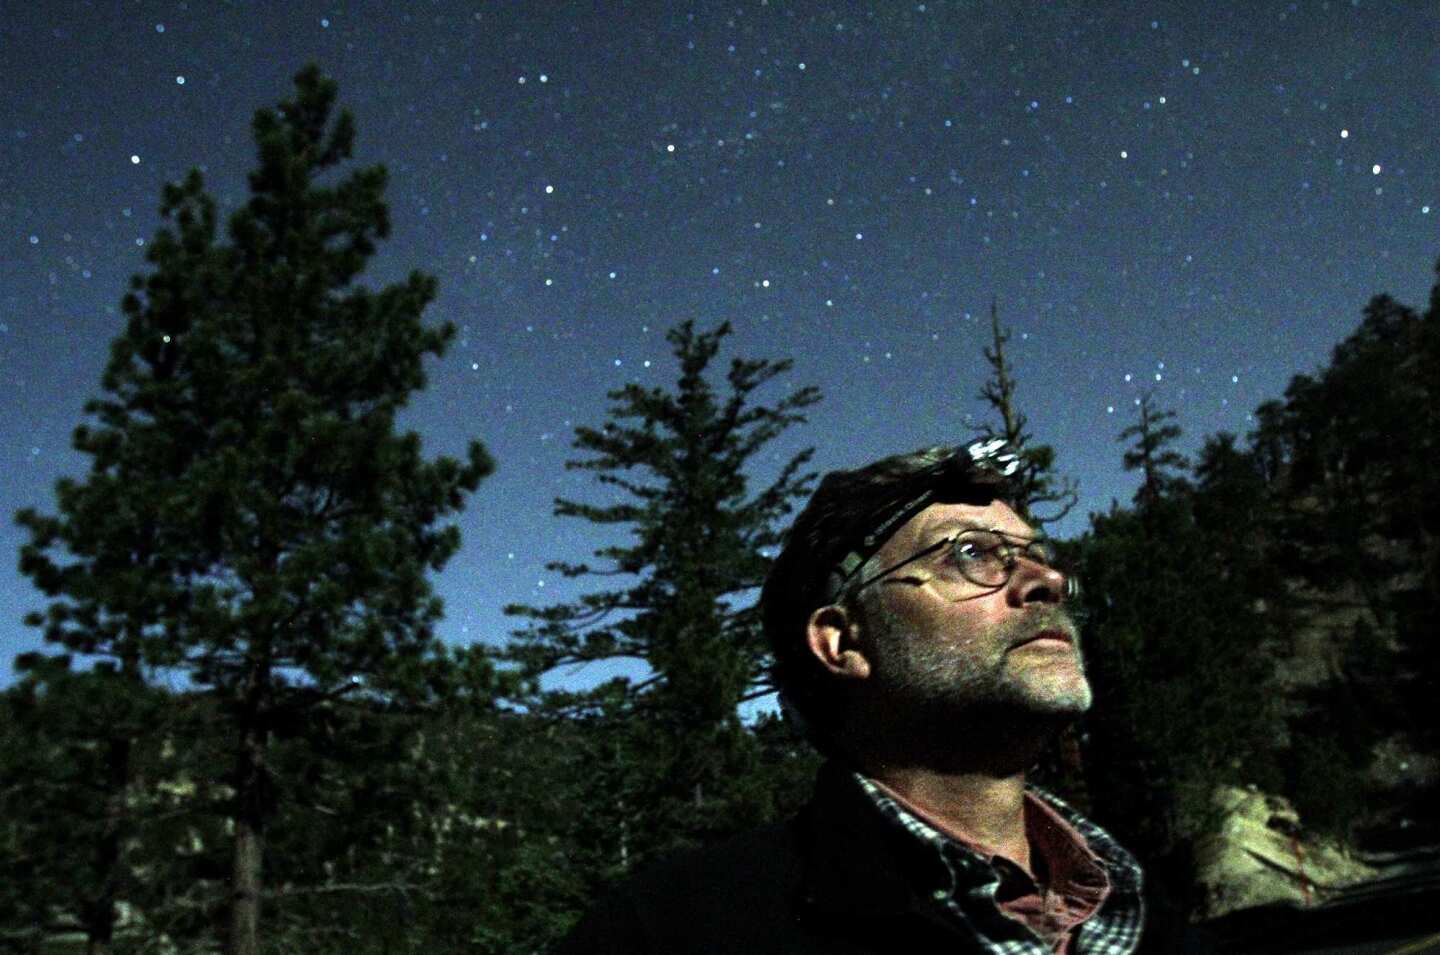 Lance Benner looks into the night sky in the Angeles National Forest in search of owls.